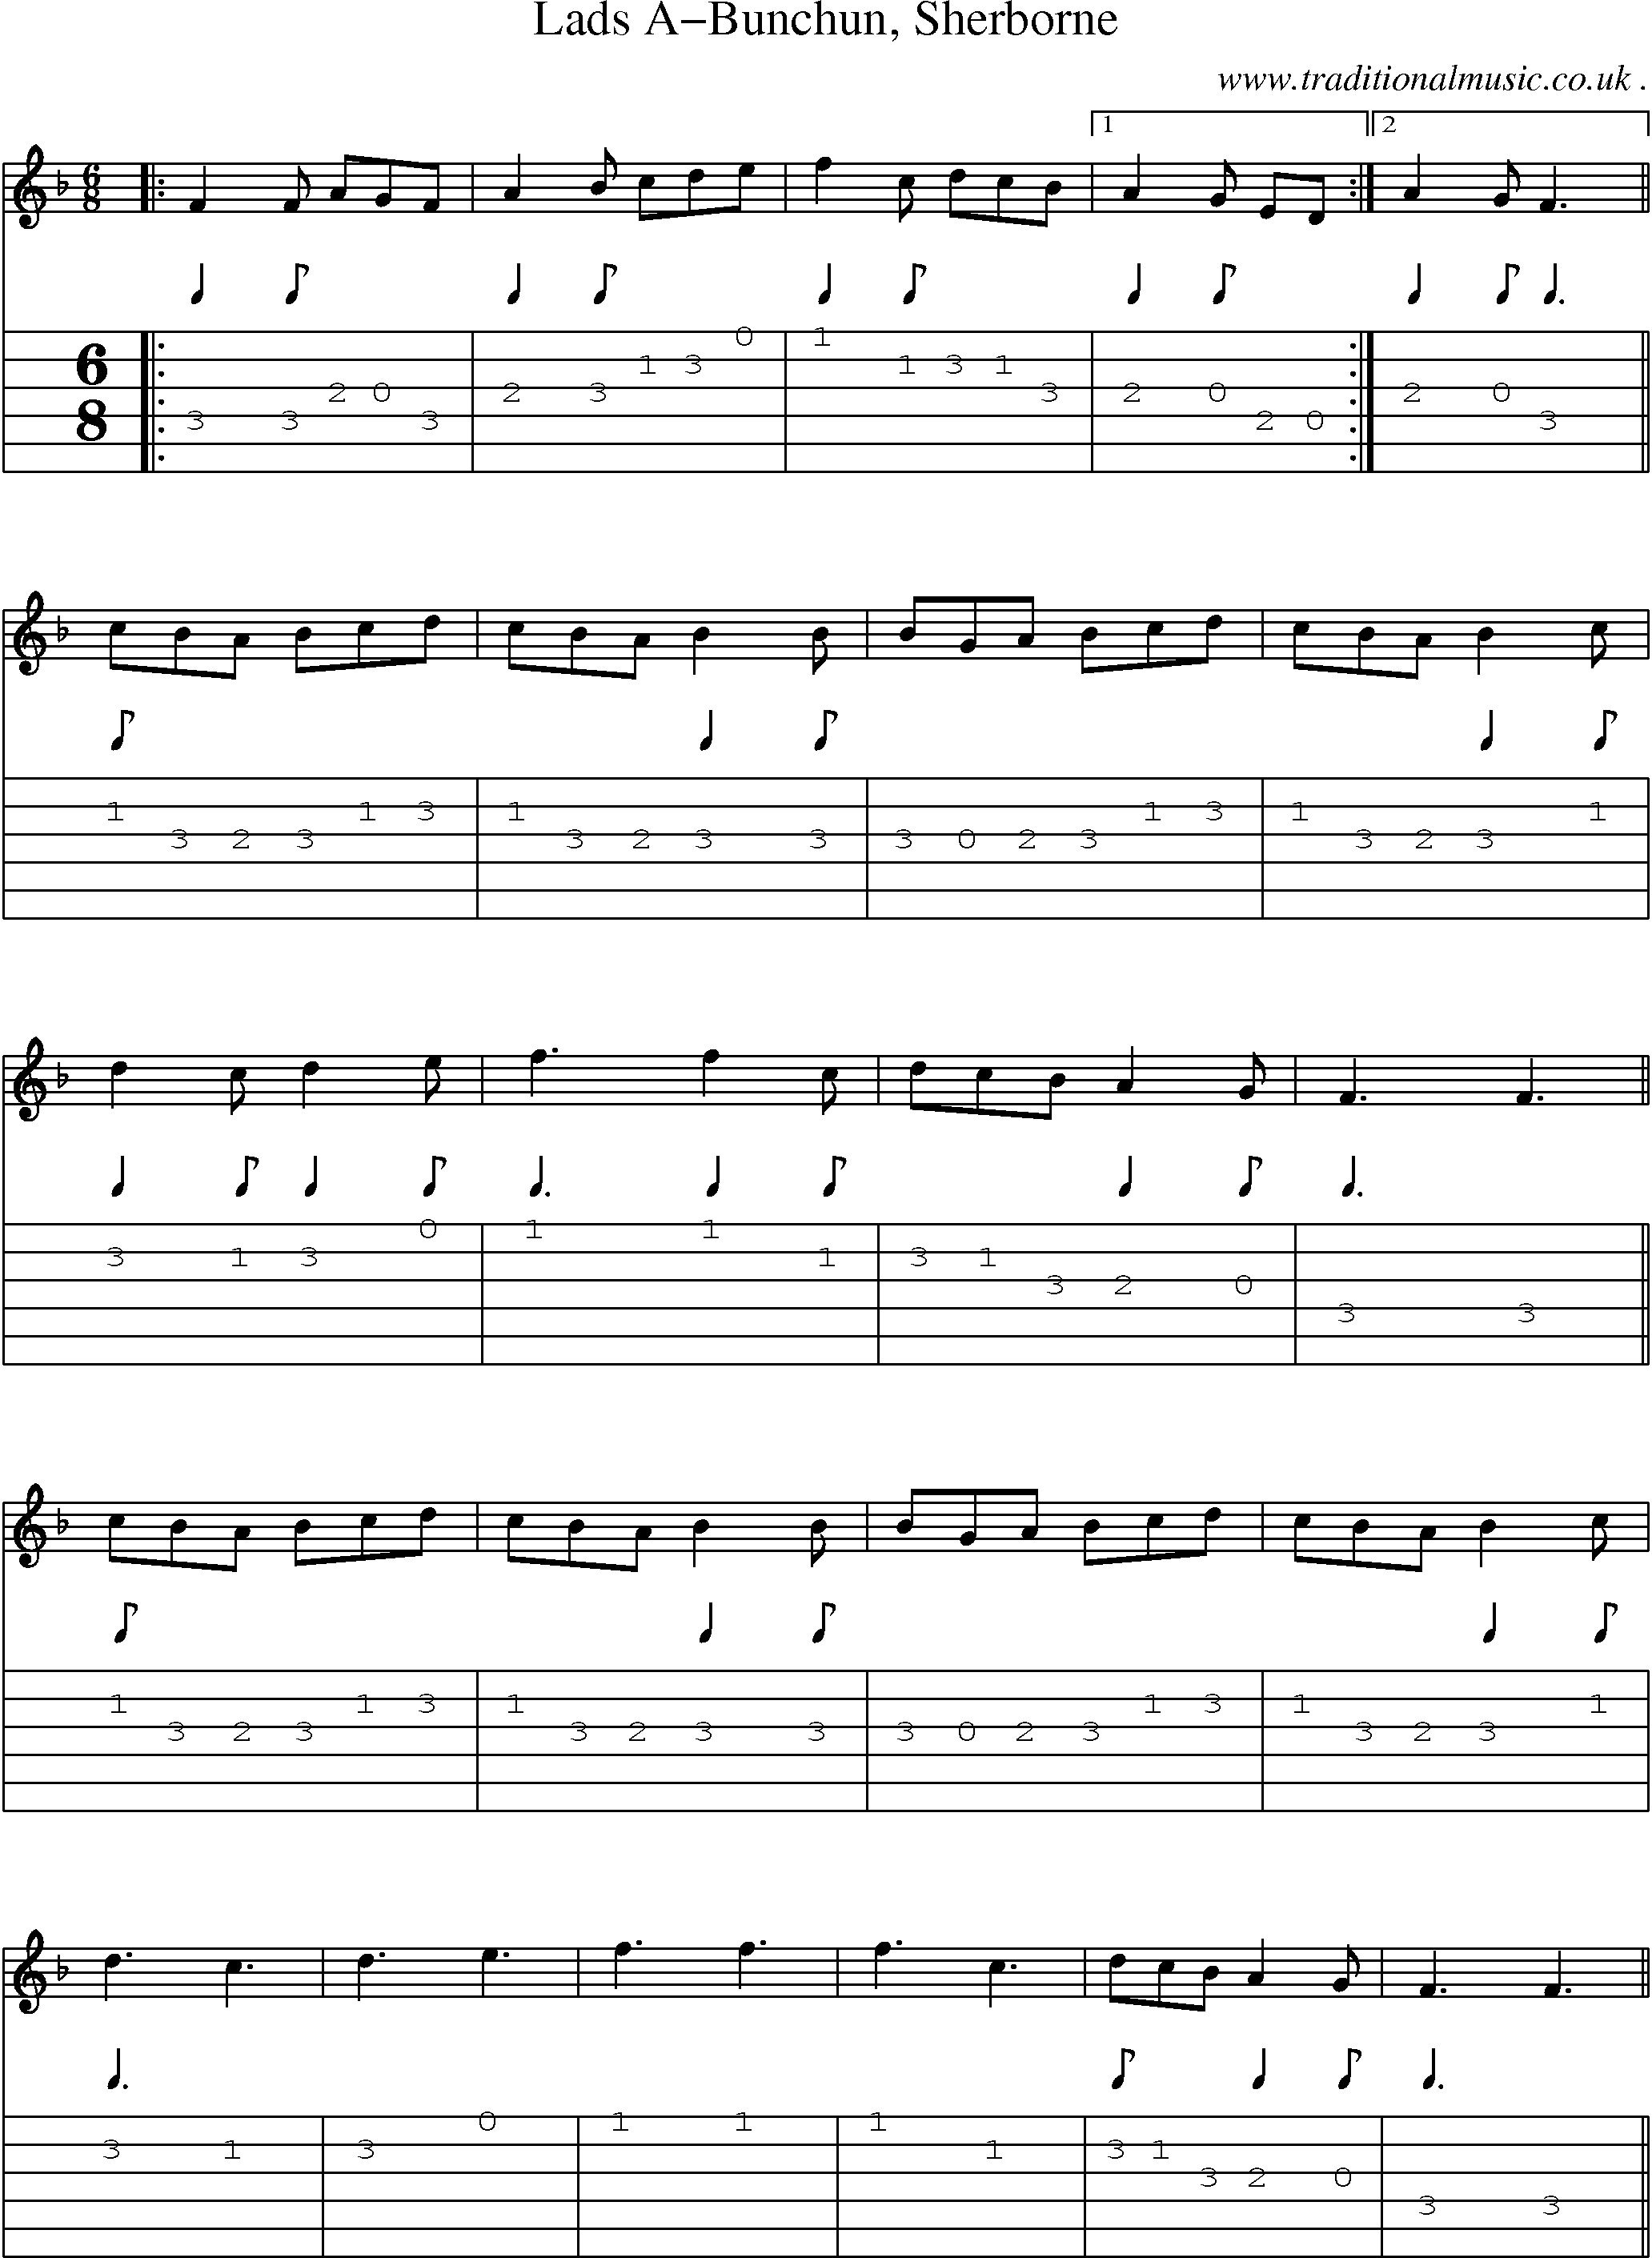 Sheet-Music and Guitar Tabs for Lads A-bunchun Sherborne